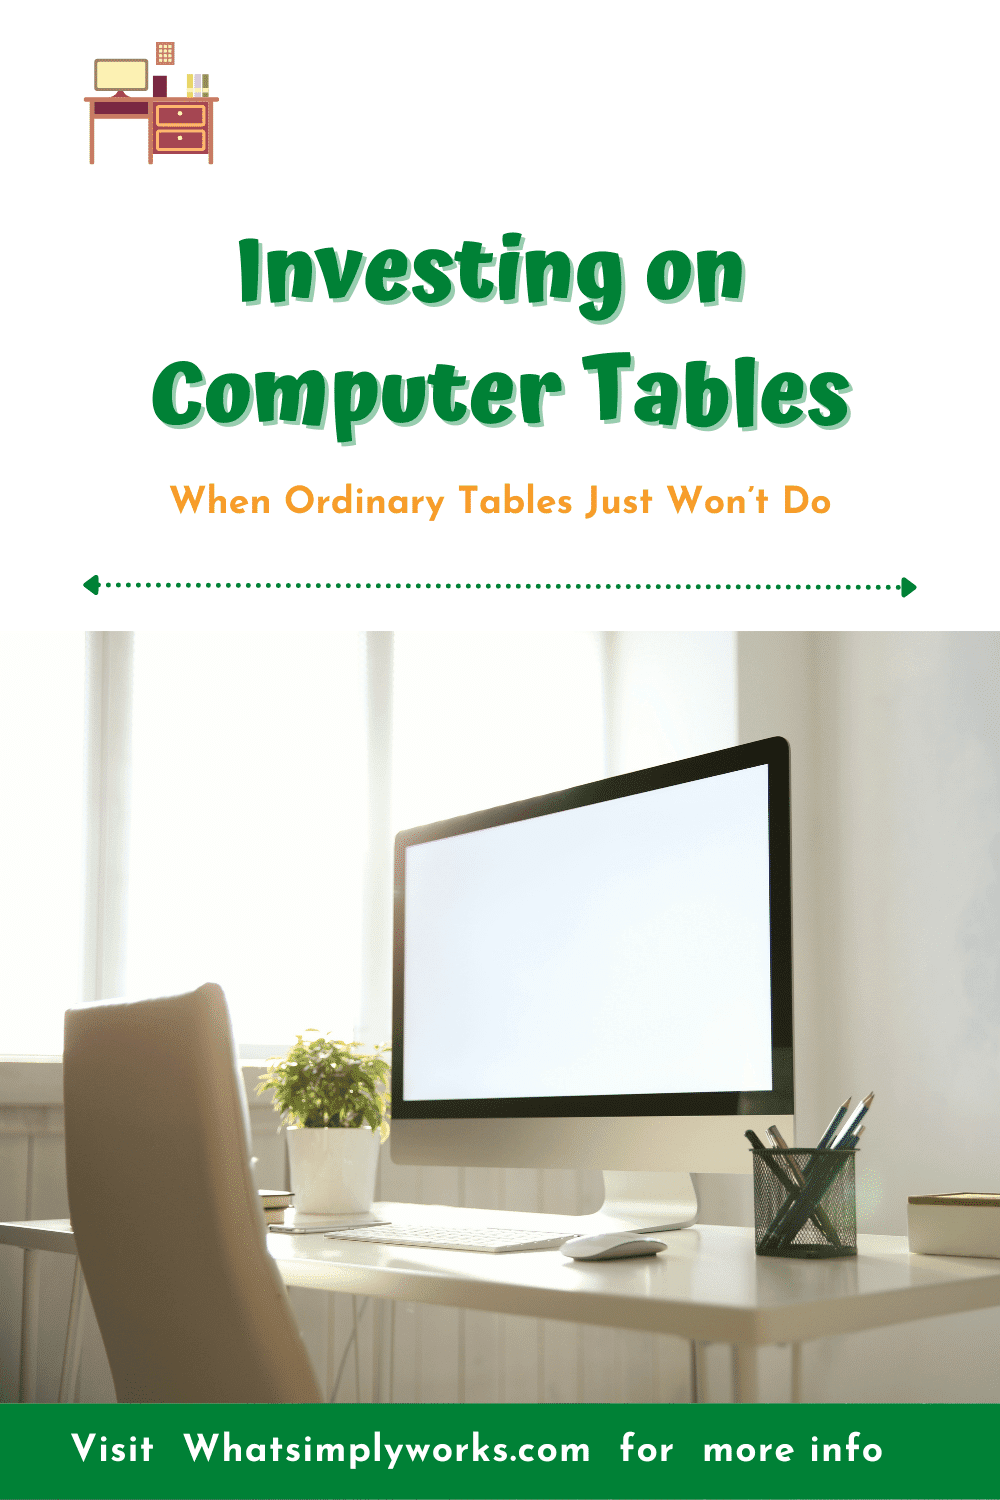 Investing on Computer Tables: When Ordinary Tables Just Won’t Do